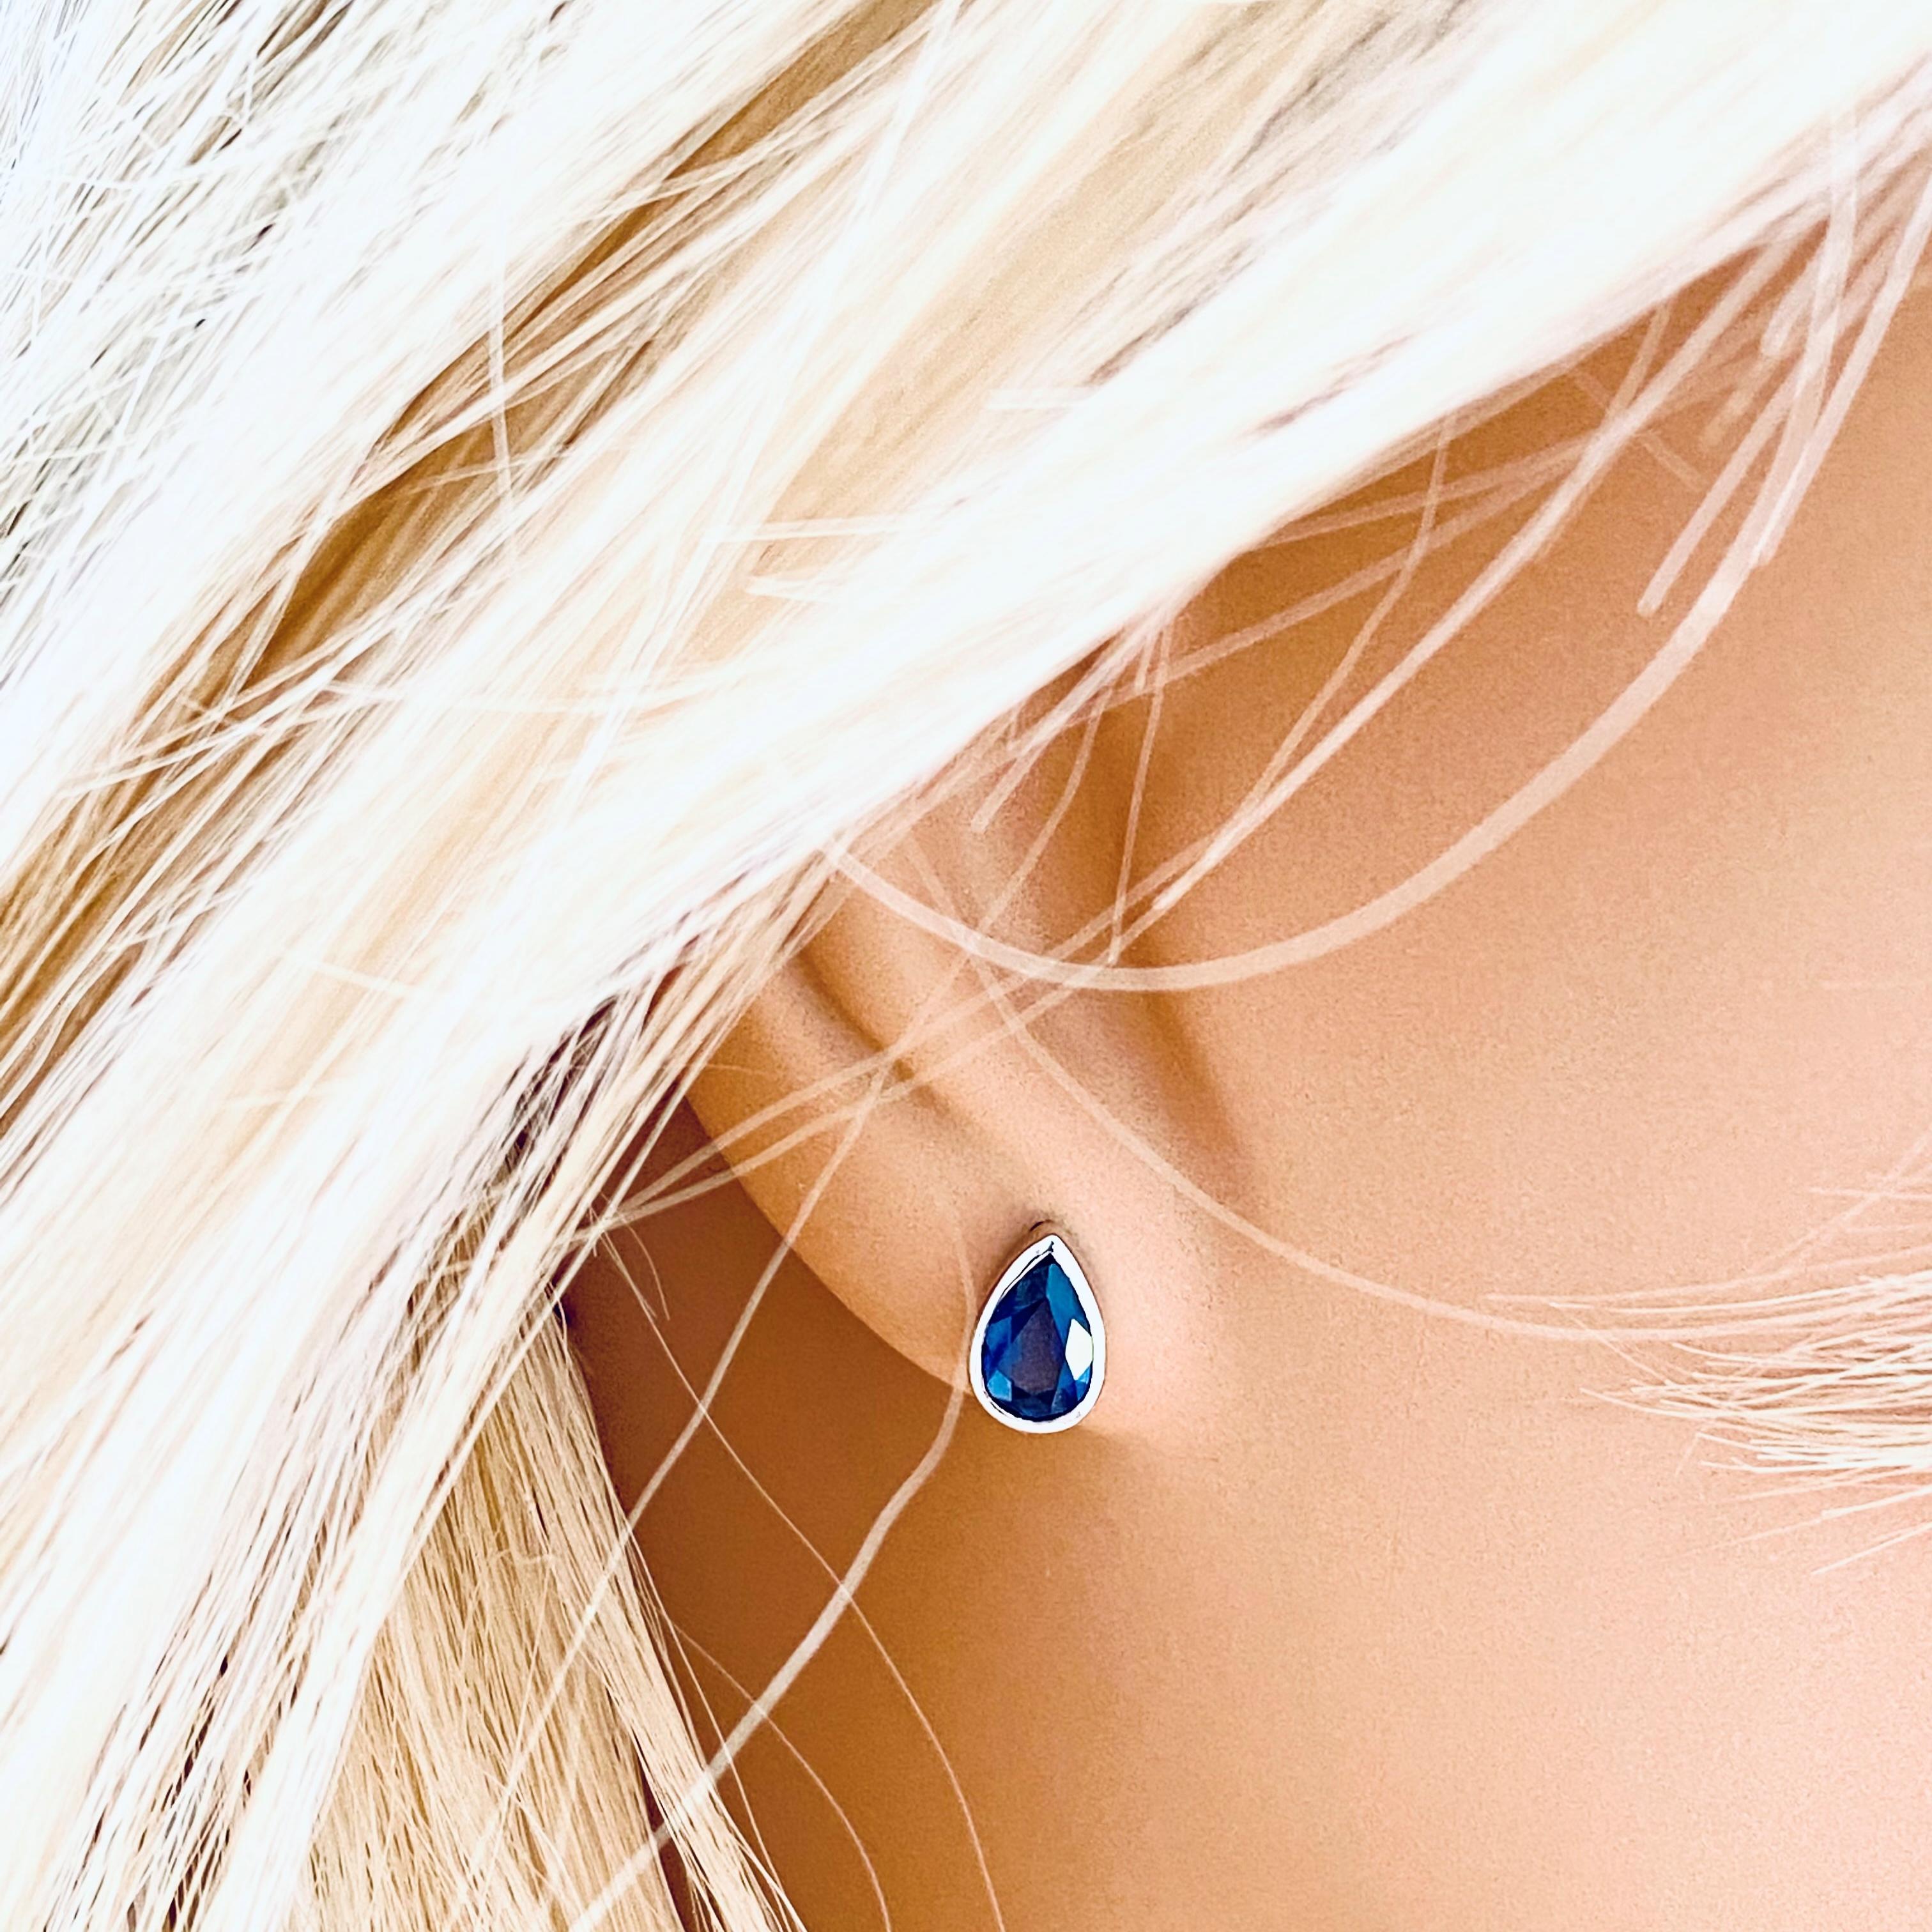 Contemporary White Gold Bezel Set Pair Blue Pear Shaped Sapphire Stud Earrings